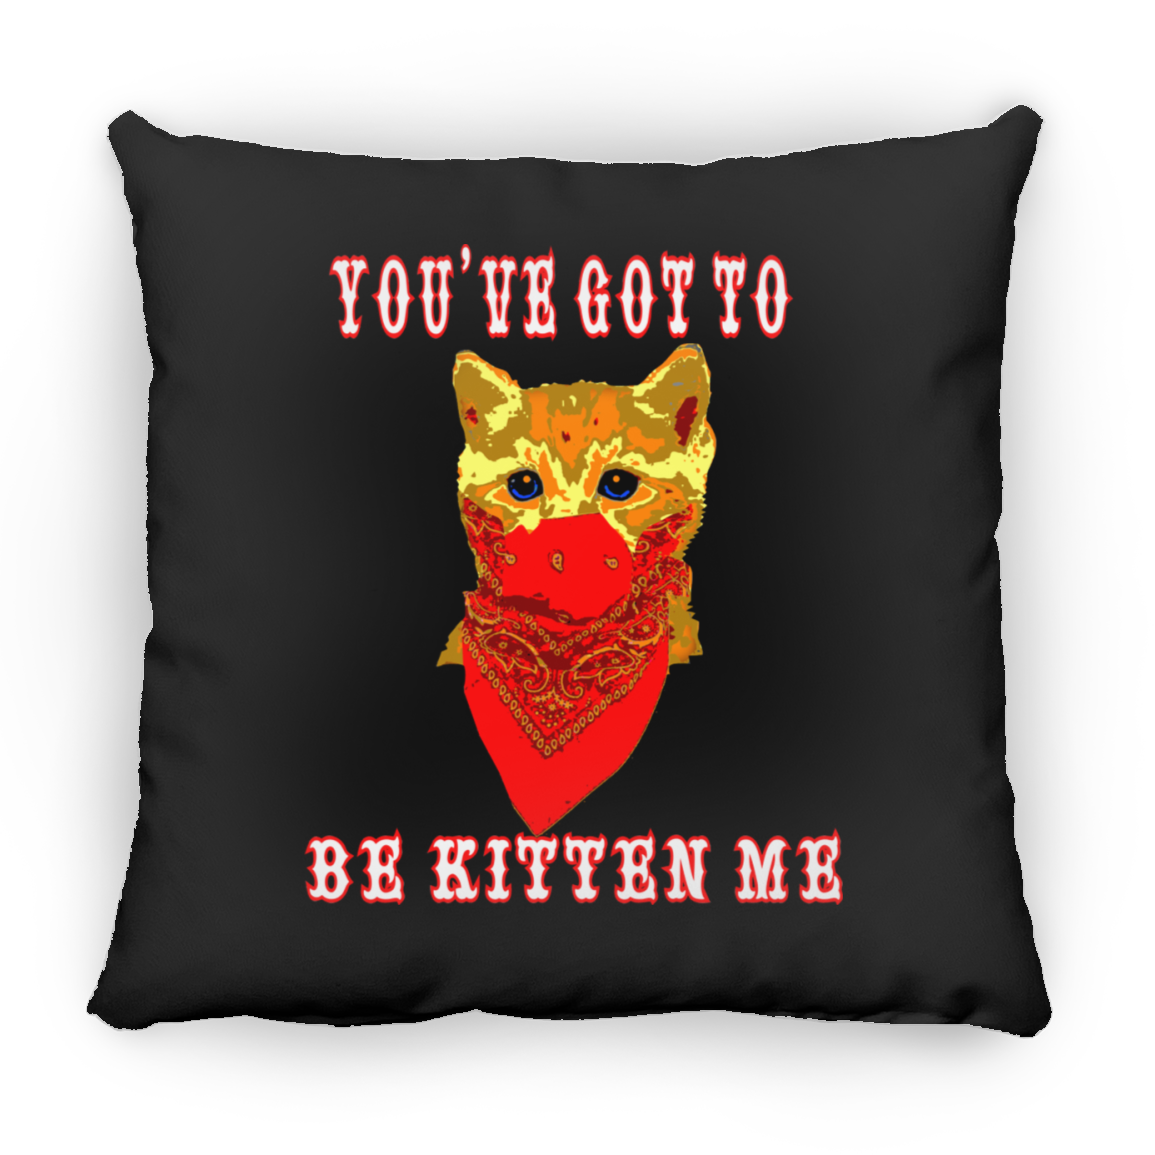 ArtichokeUSA Custom Design. You've Got To Be Kitten Me?! 2020, Not What We Expected. Square Pillow 18x18